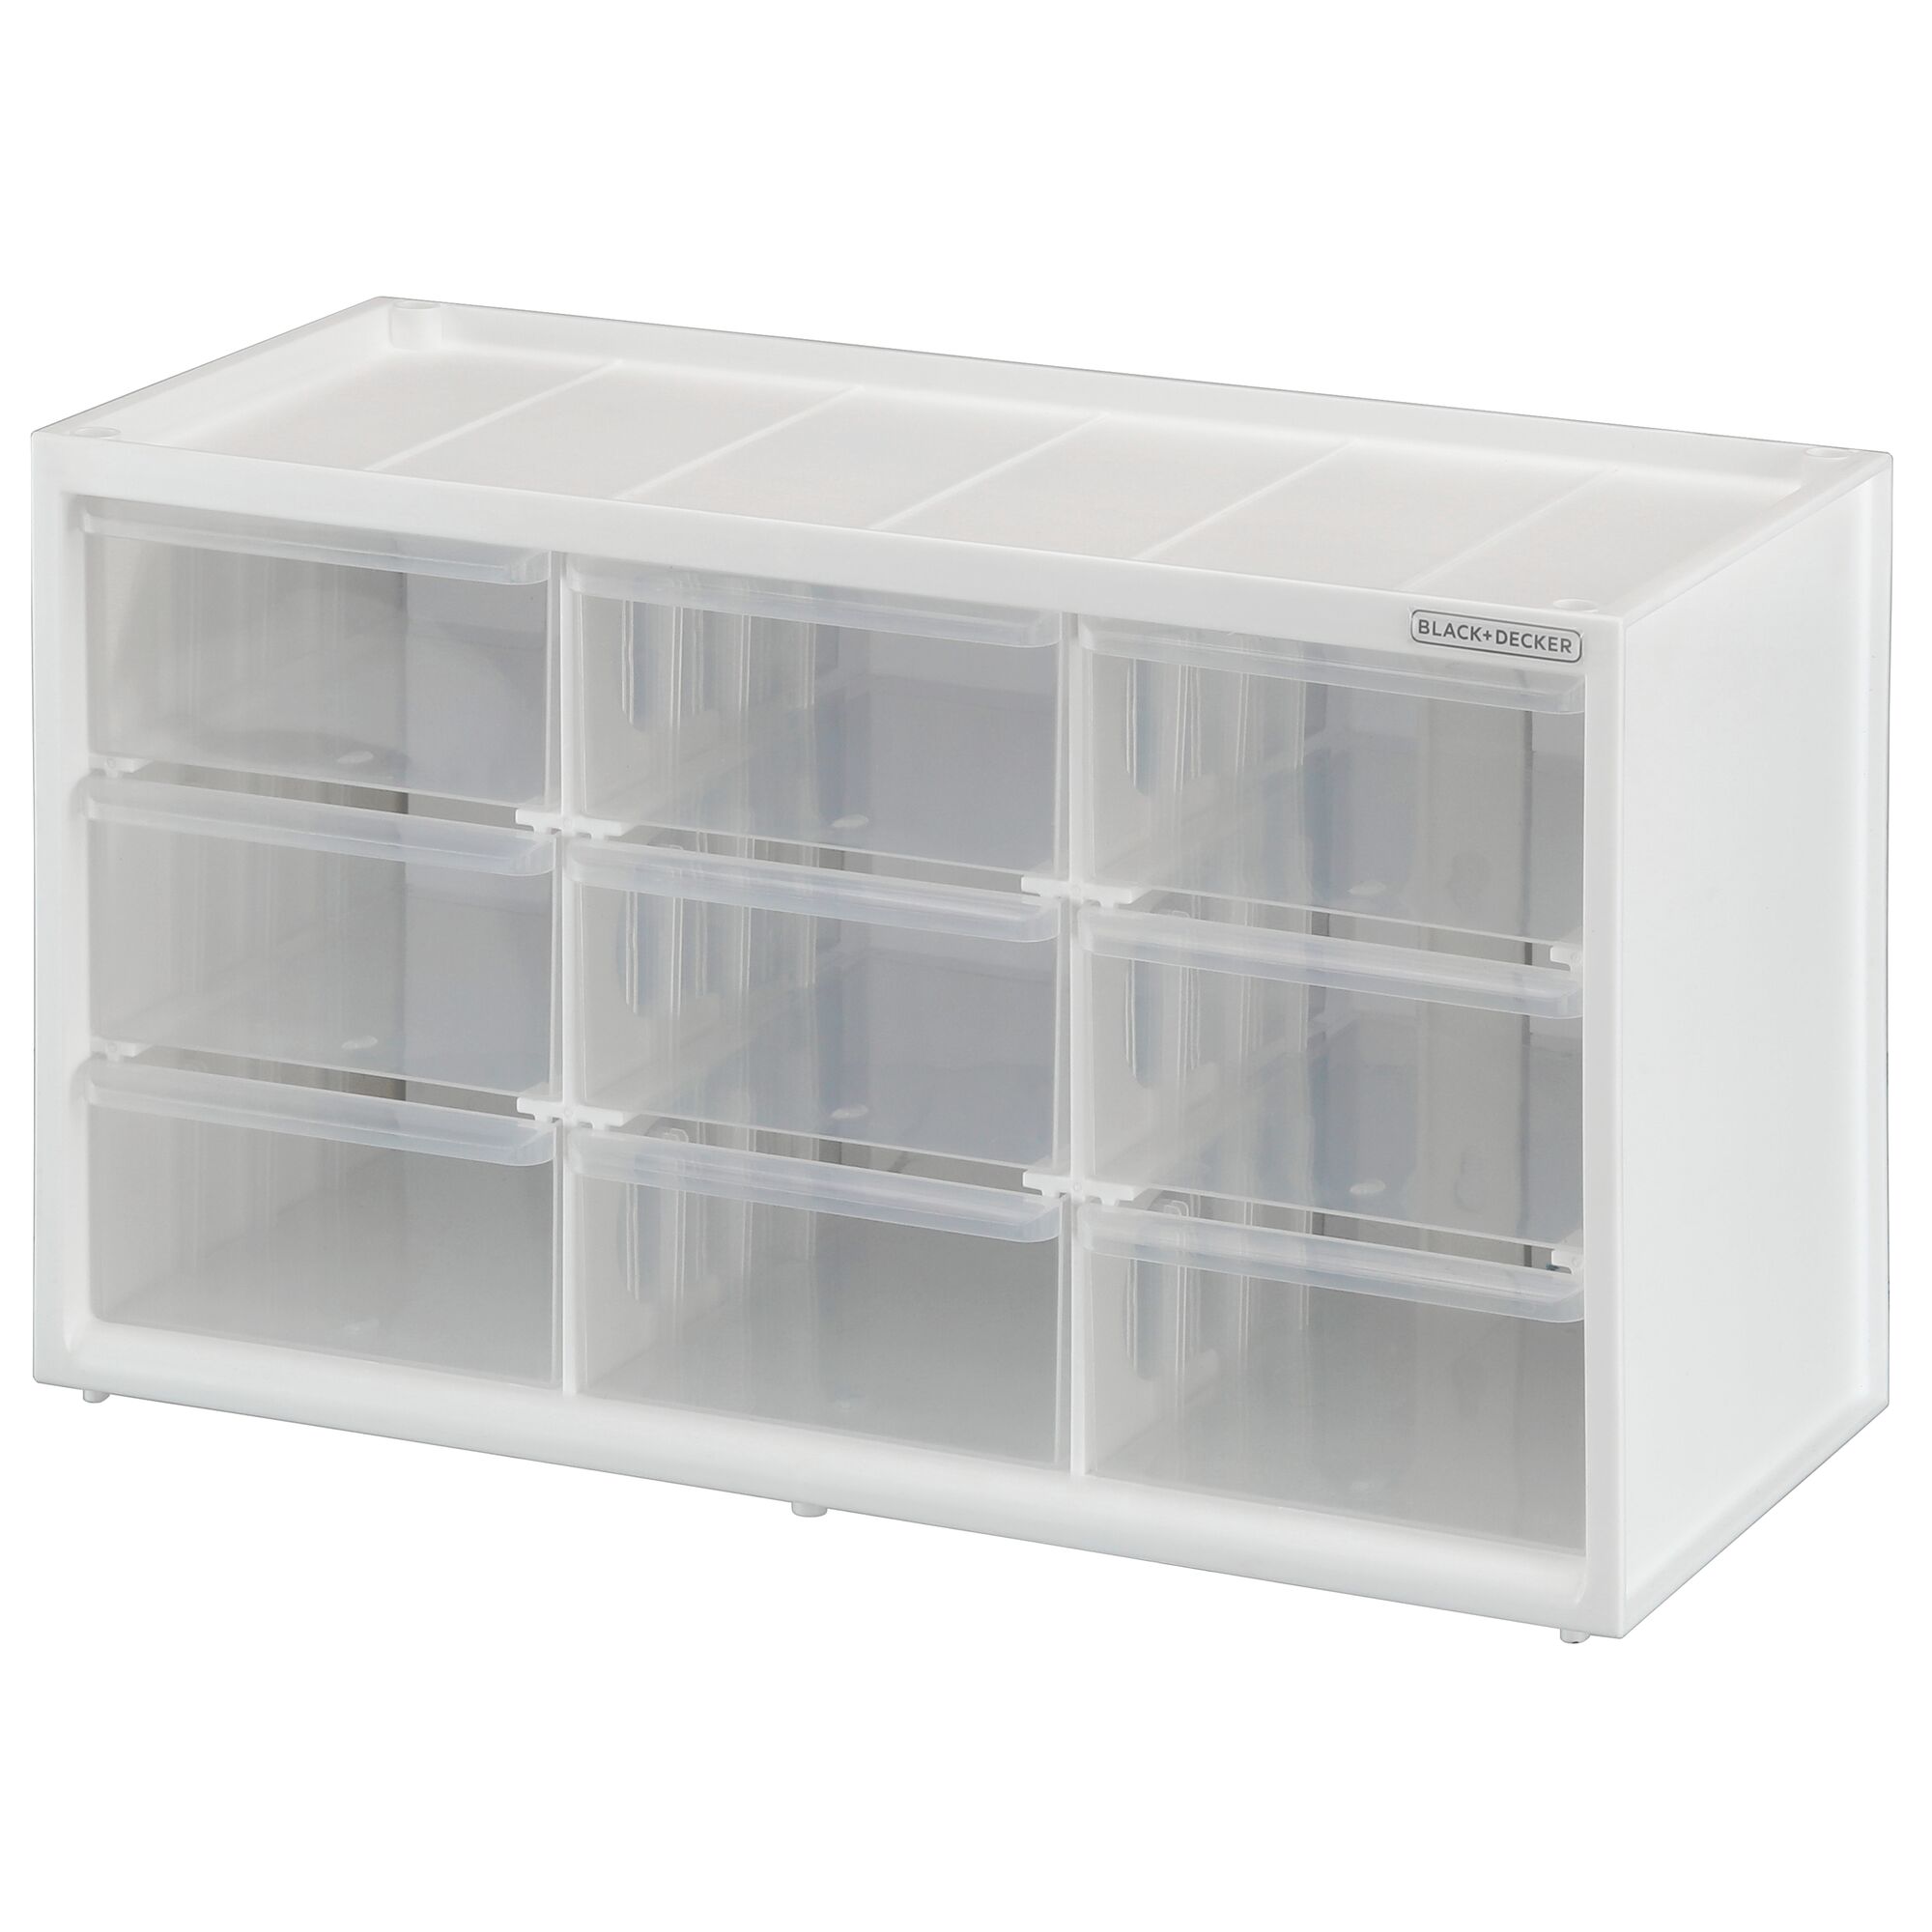 Black and decker Large 9 Drawer Bin System with clear drawers